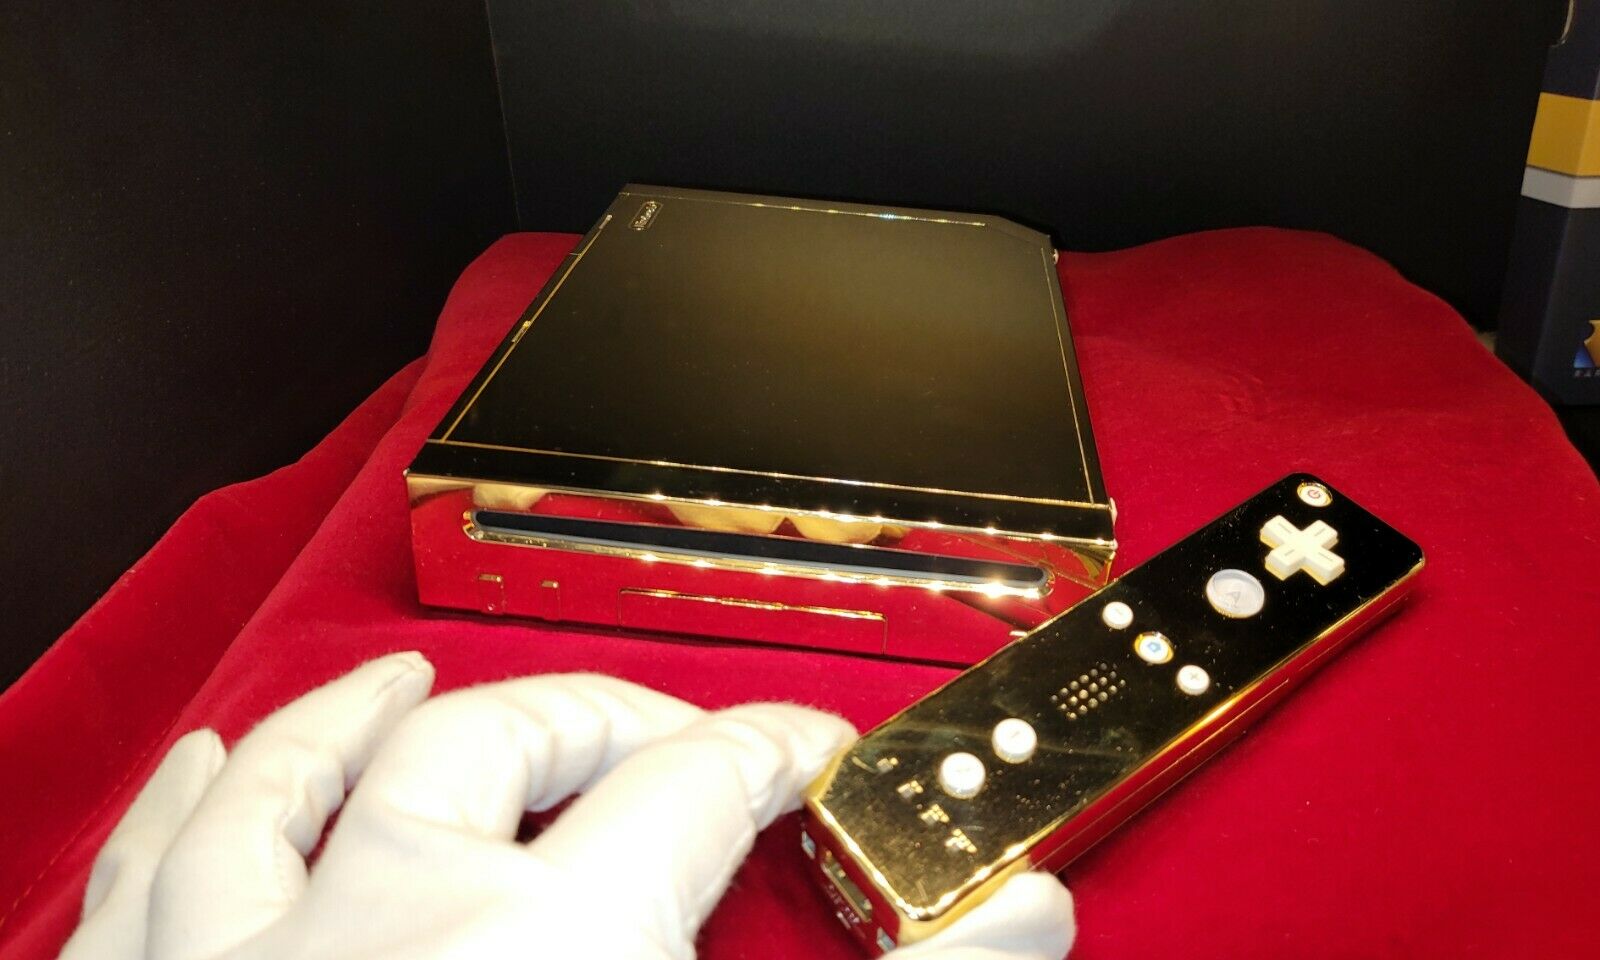 24K gold-plated PS5 limited edition console due out this year